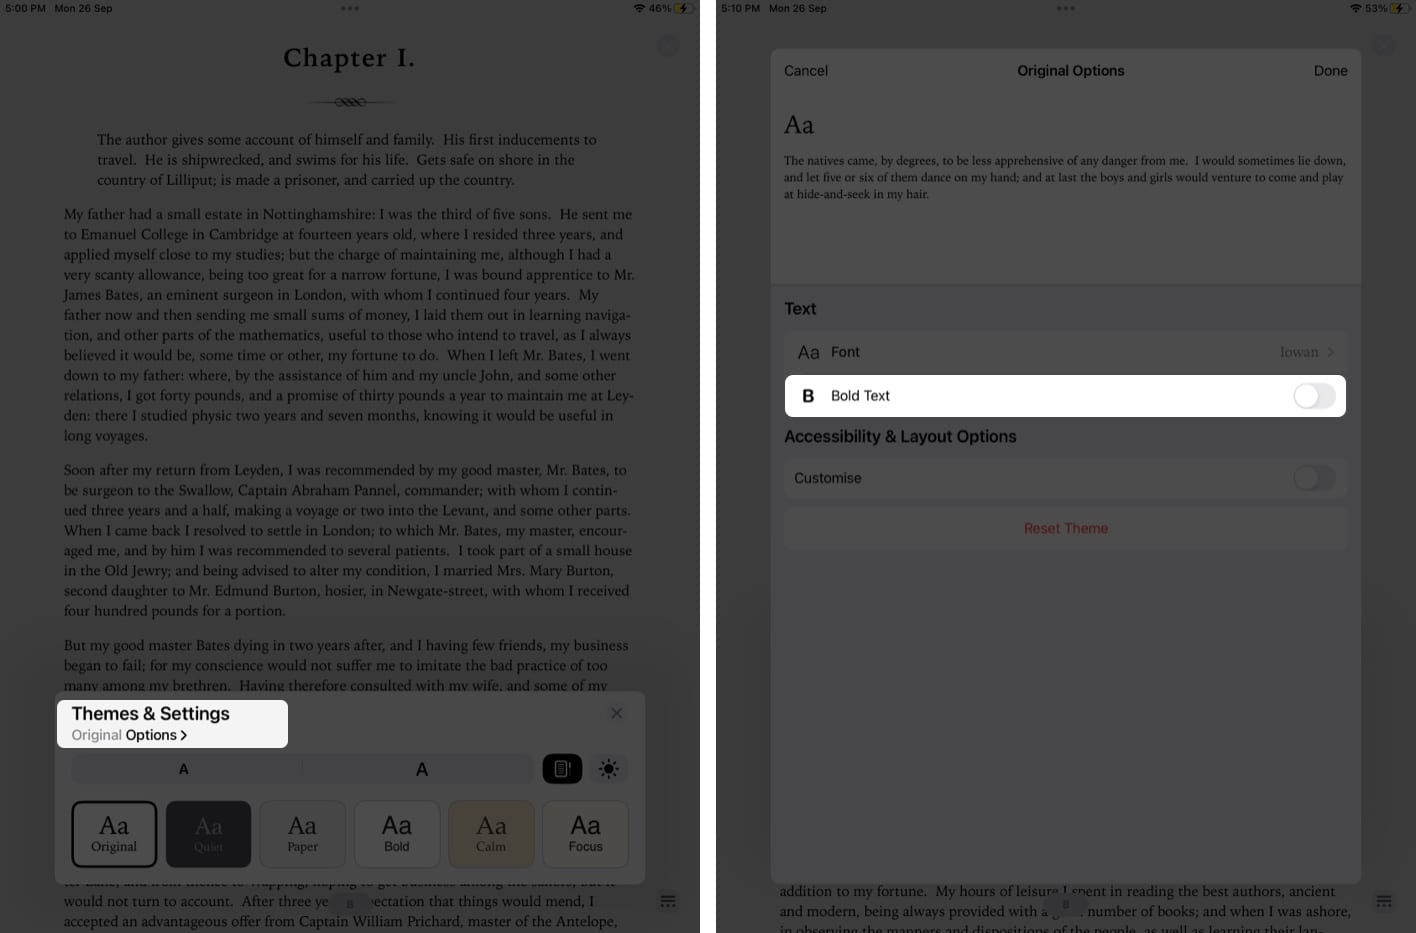 Making text Bold in Books app on an iPhone